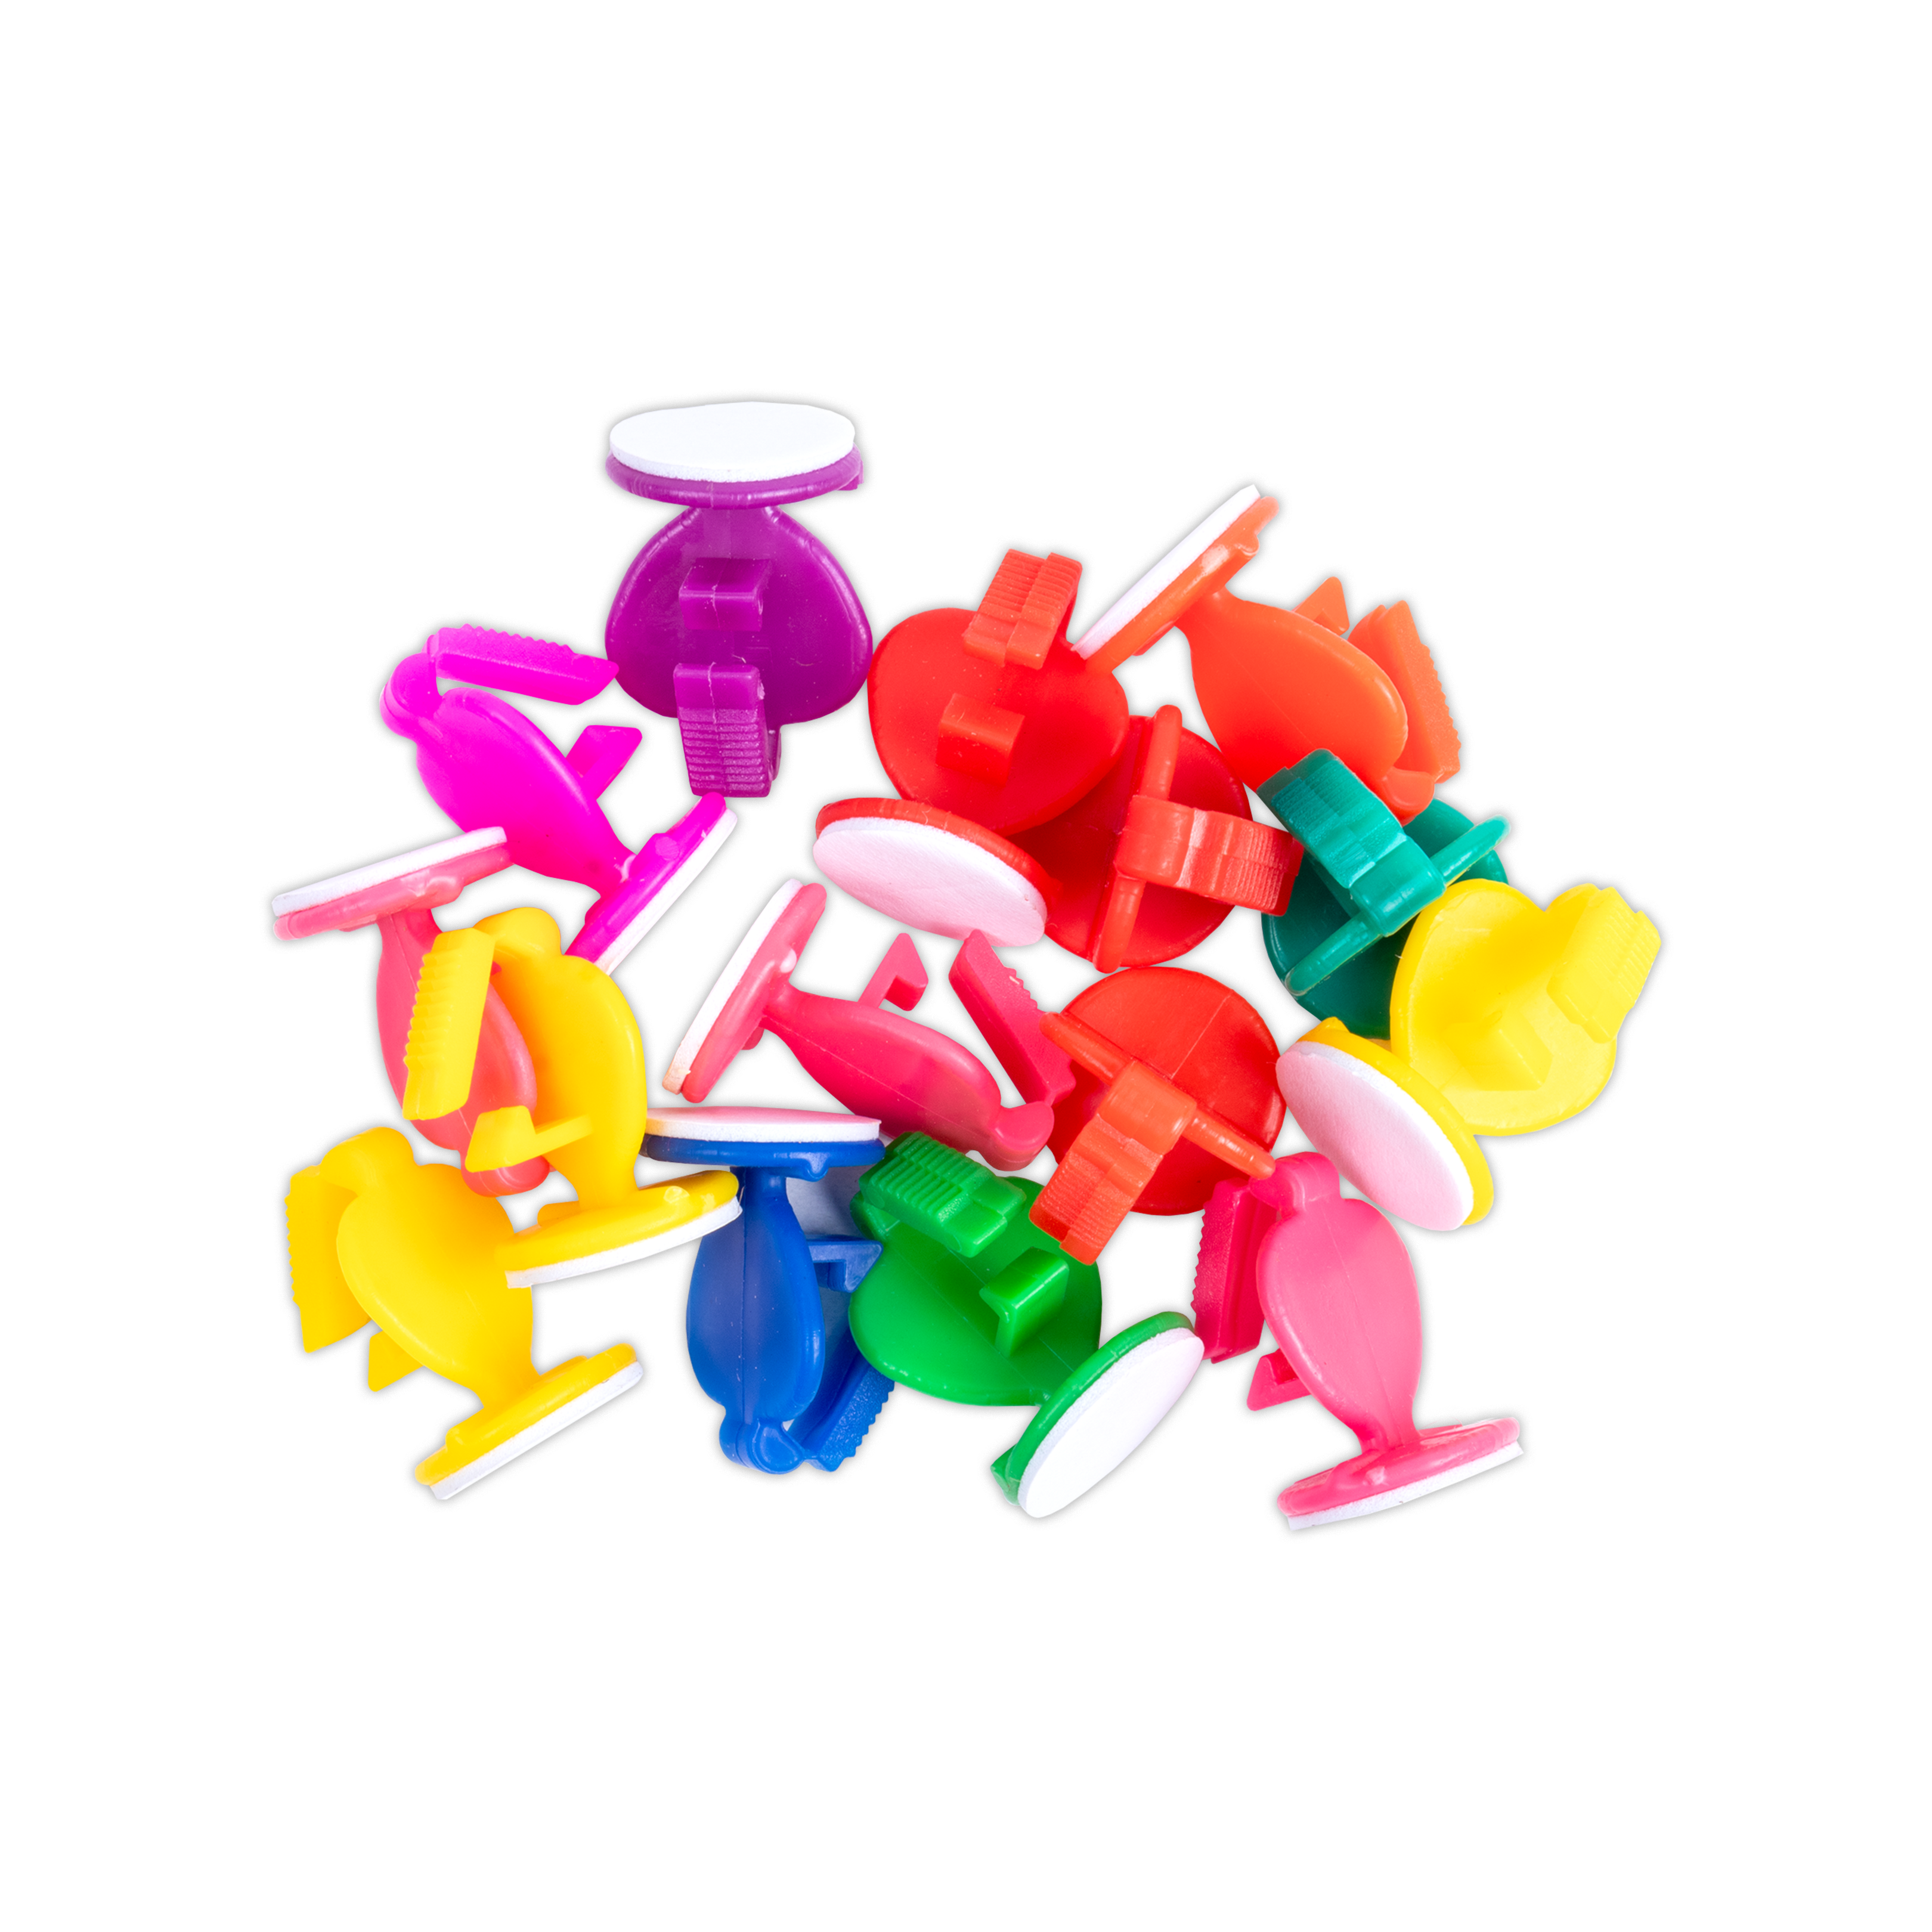 Self Adhesive Hooks For Holding Balloons Assorted 15pc